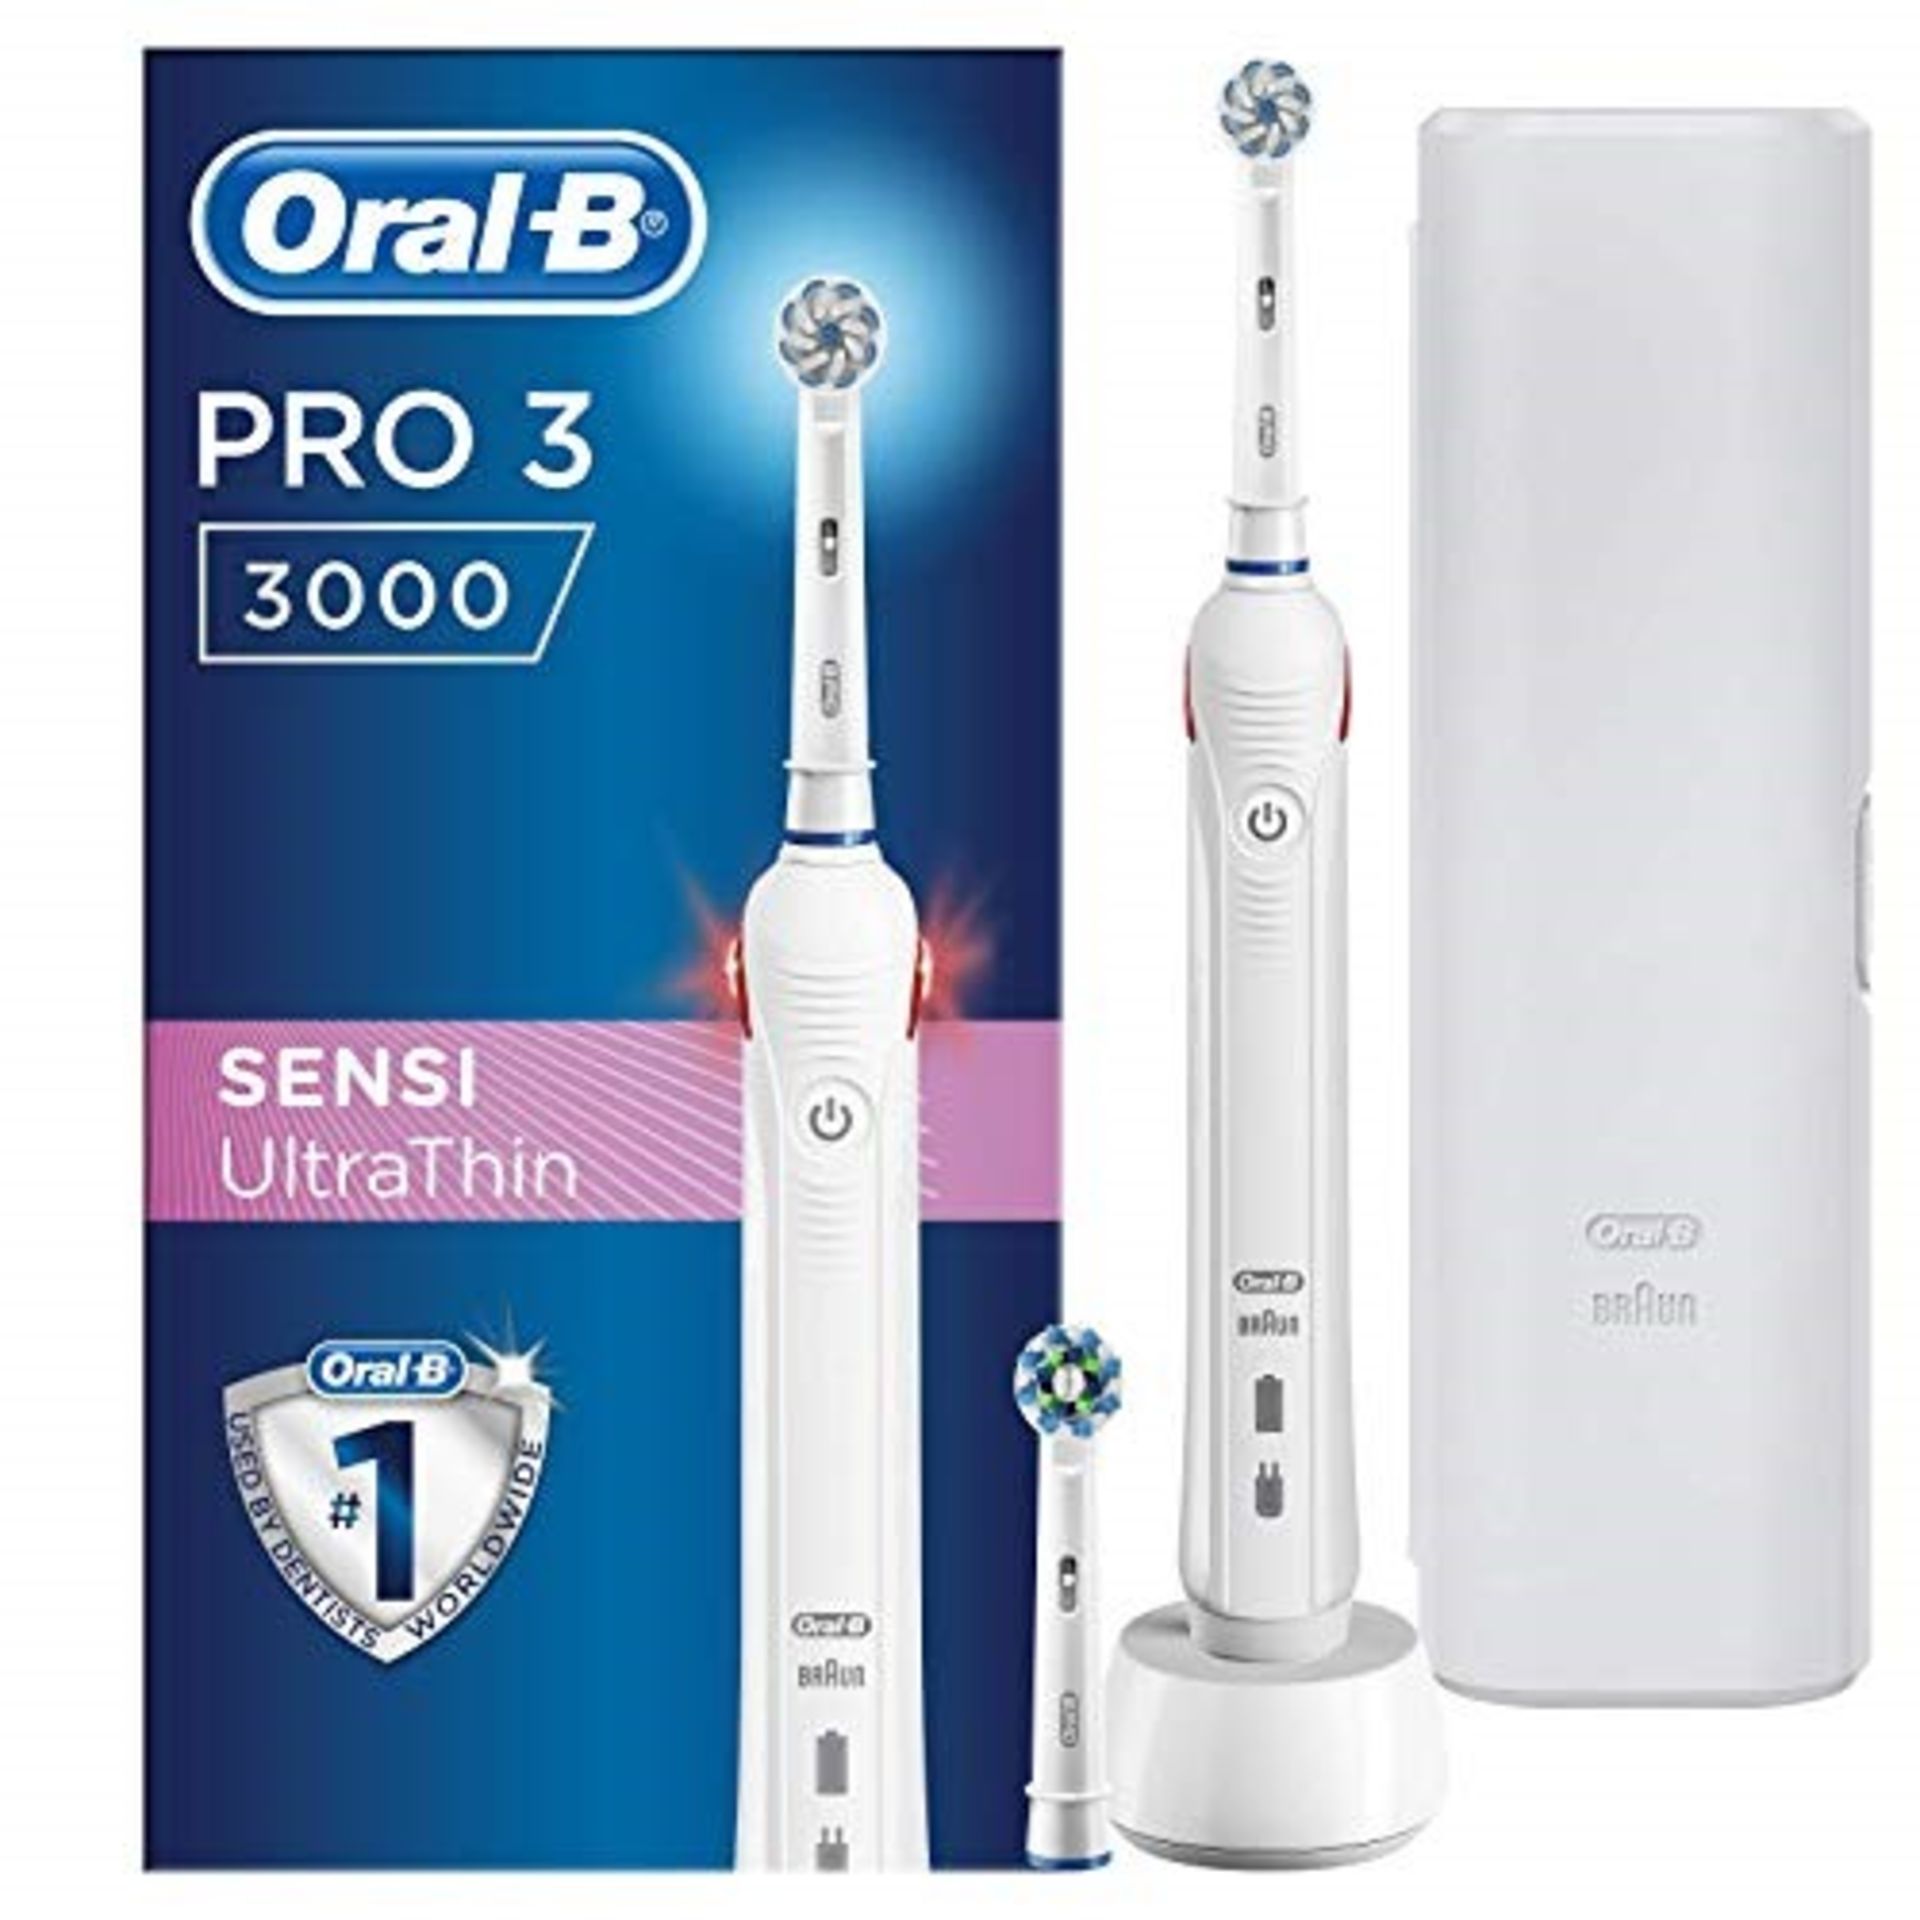 Oral-B Pro 3 3000 Electric Rechargeable Toothbru